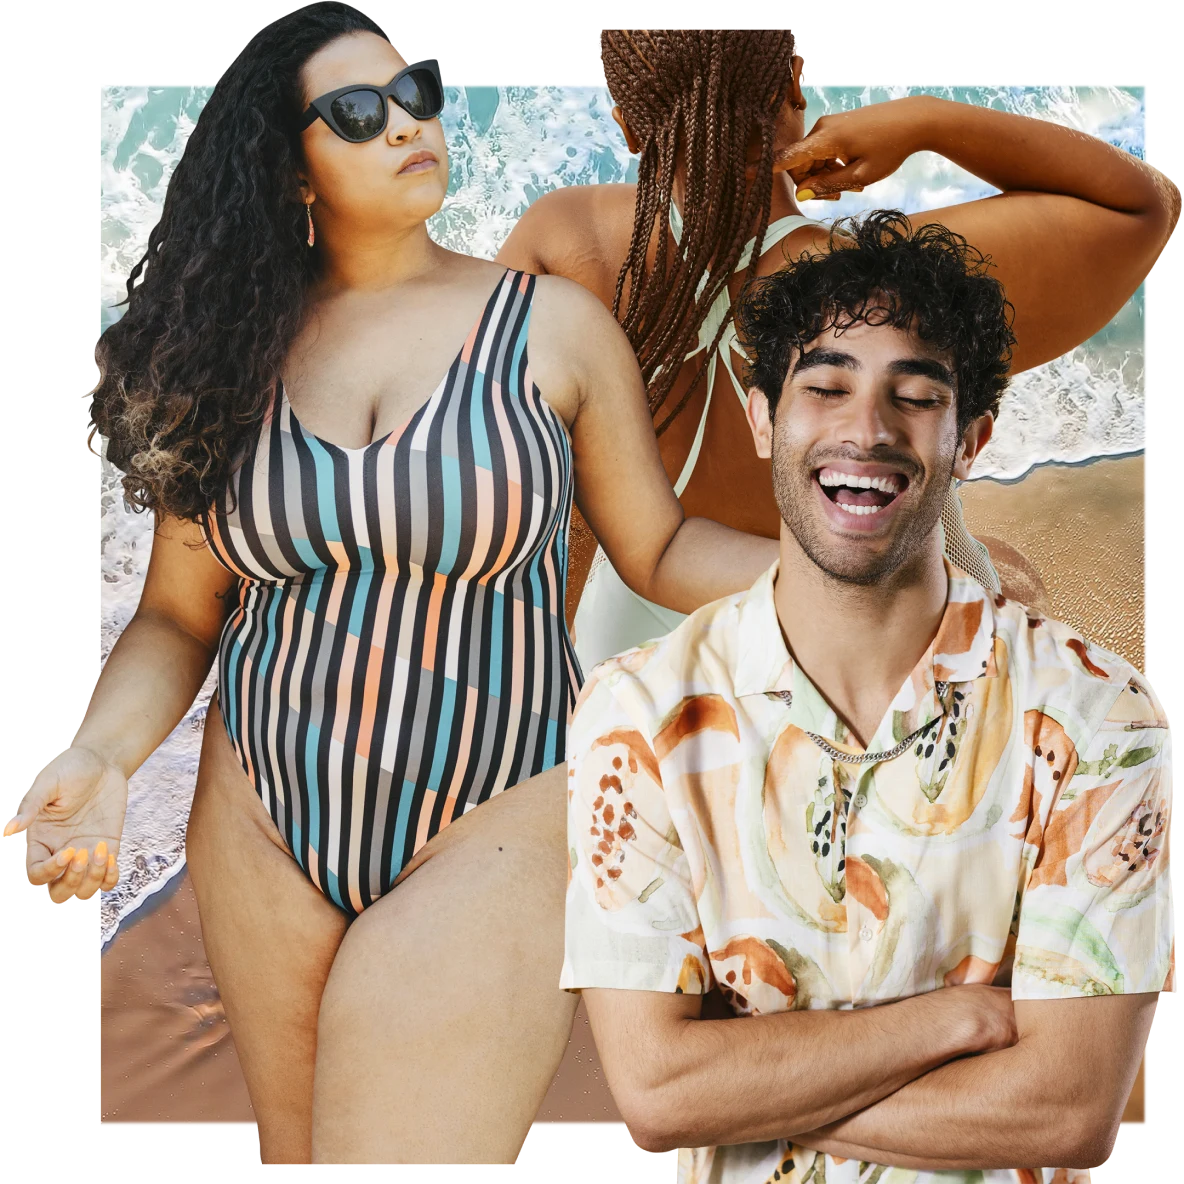 Collage of people ready for the beach: Woman in shades and striped bathing suit. Smiling man in a papaya-patterned short-sleeve shirt. Woman with braided hair heads towards the water.